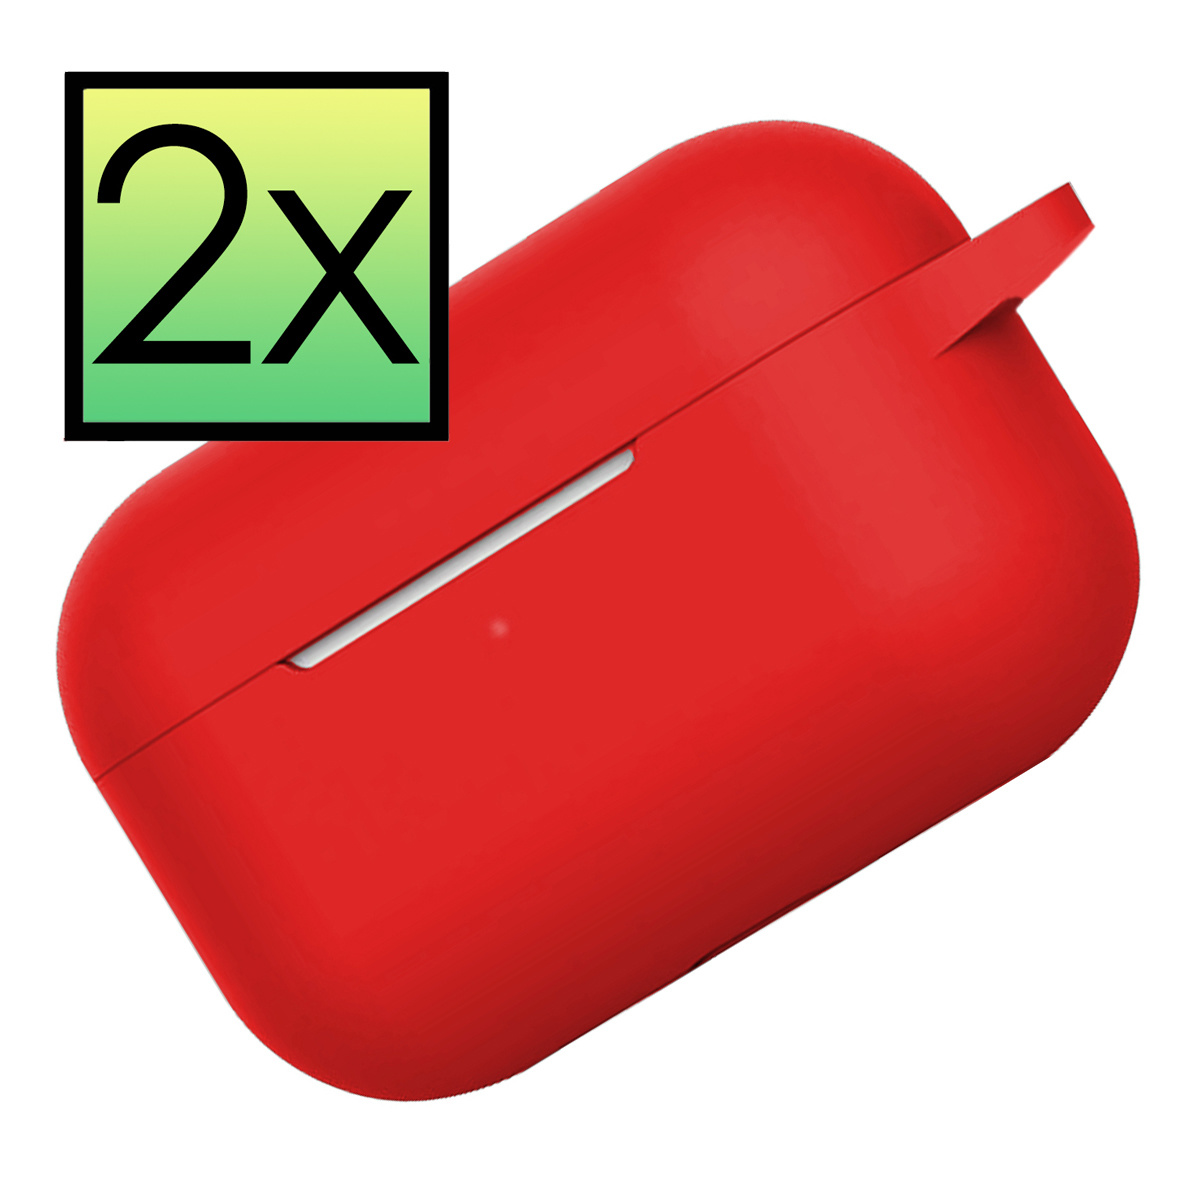 NoXx Hoes Geschikt voor Airpods Pro Hoesje Cover Silicone Case Hoes - Rood - 2x